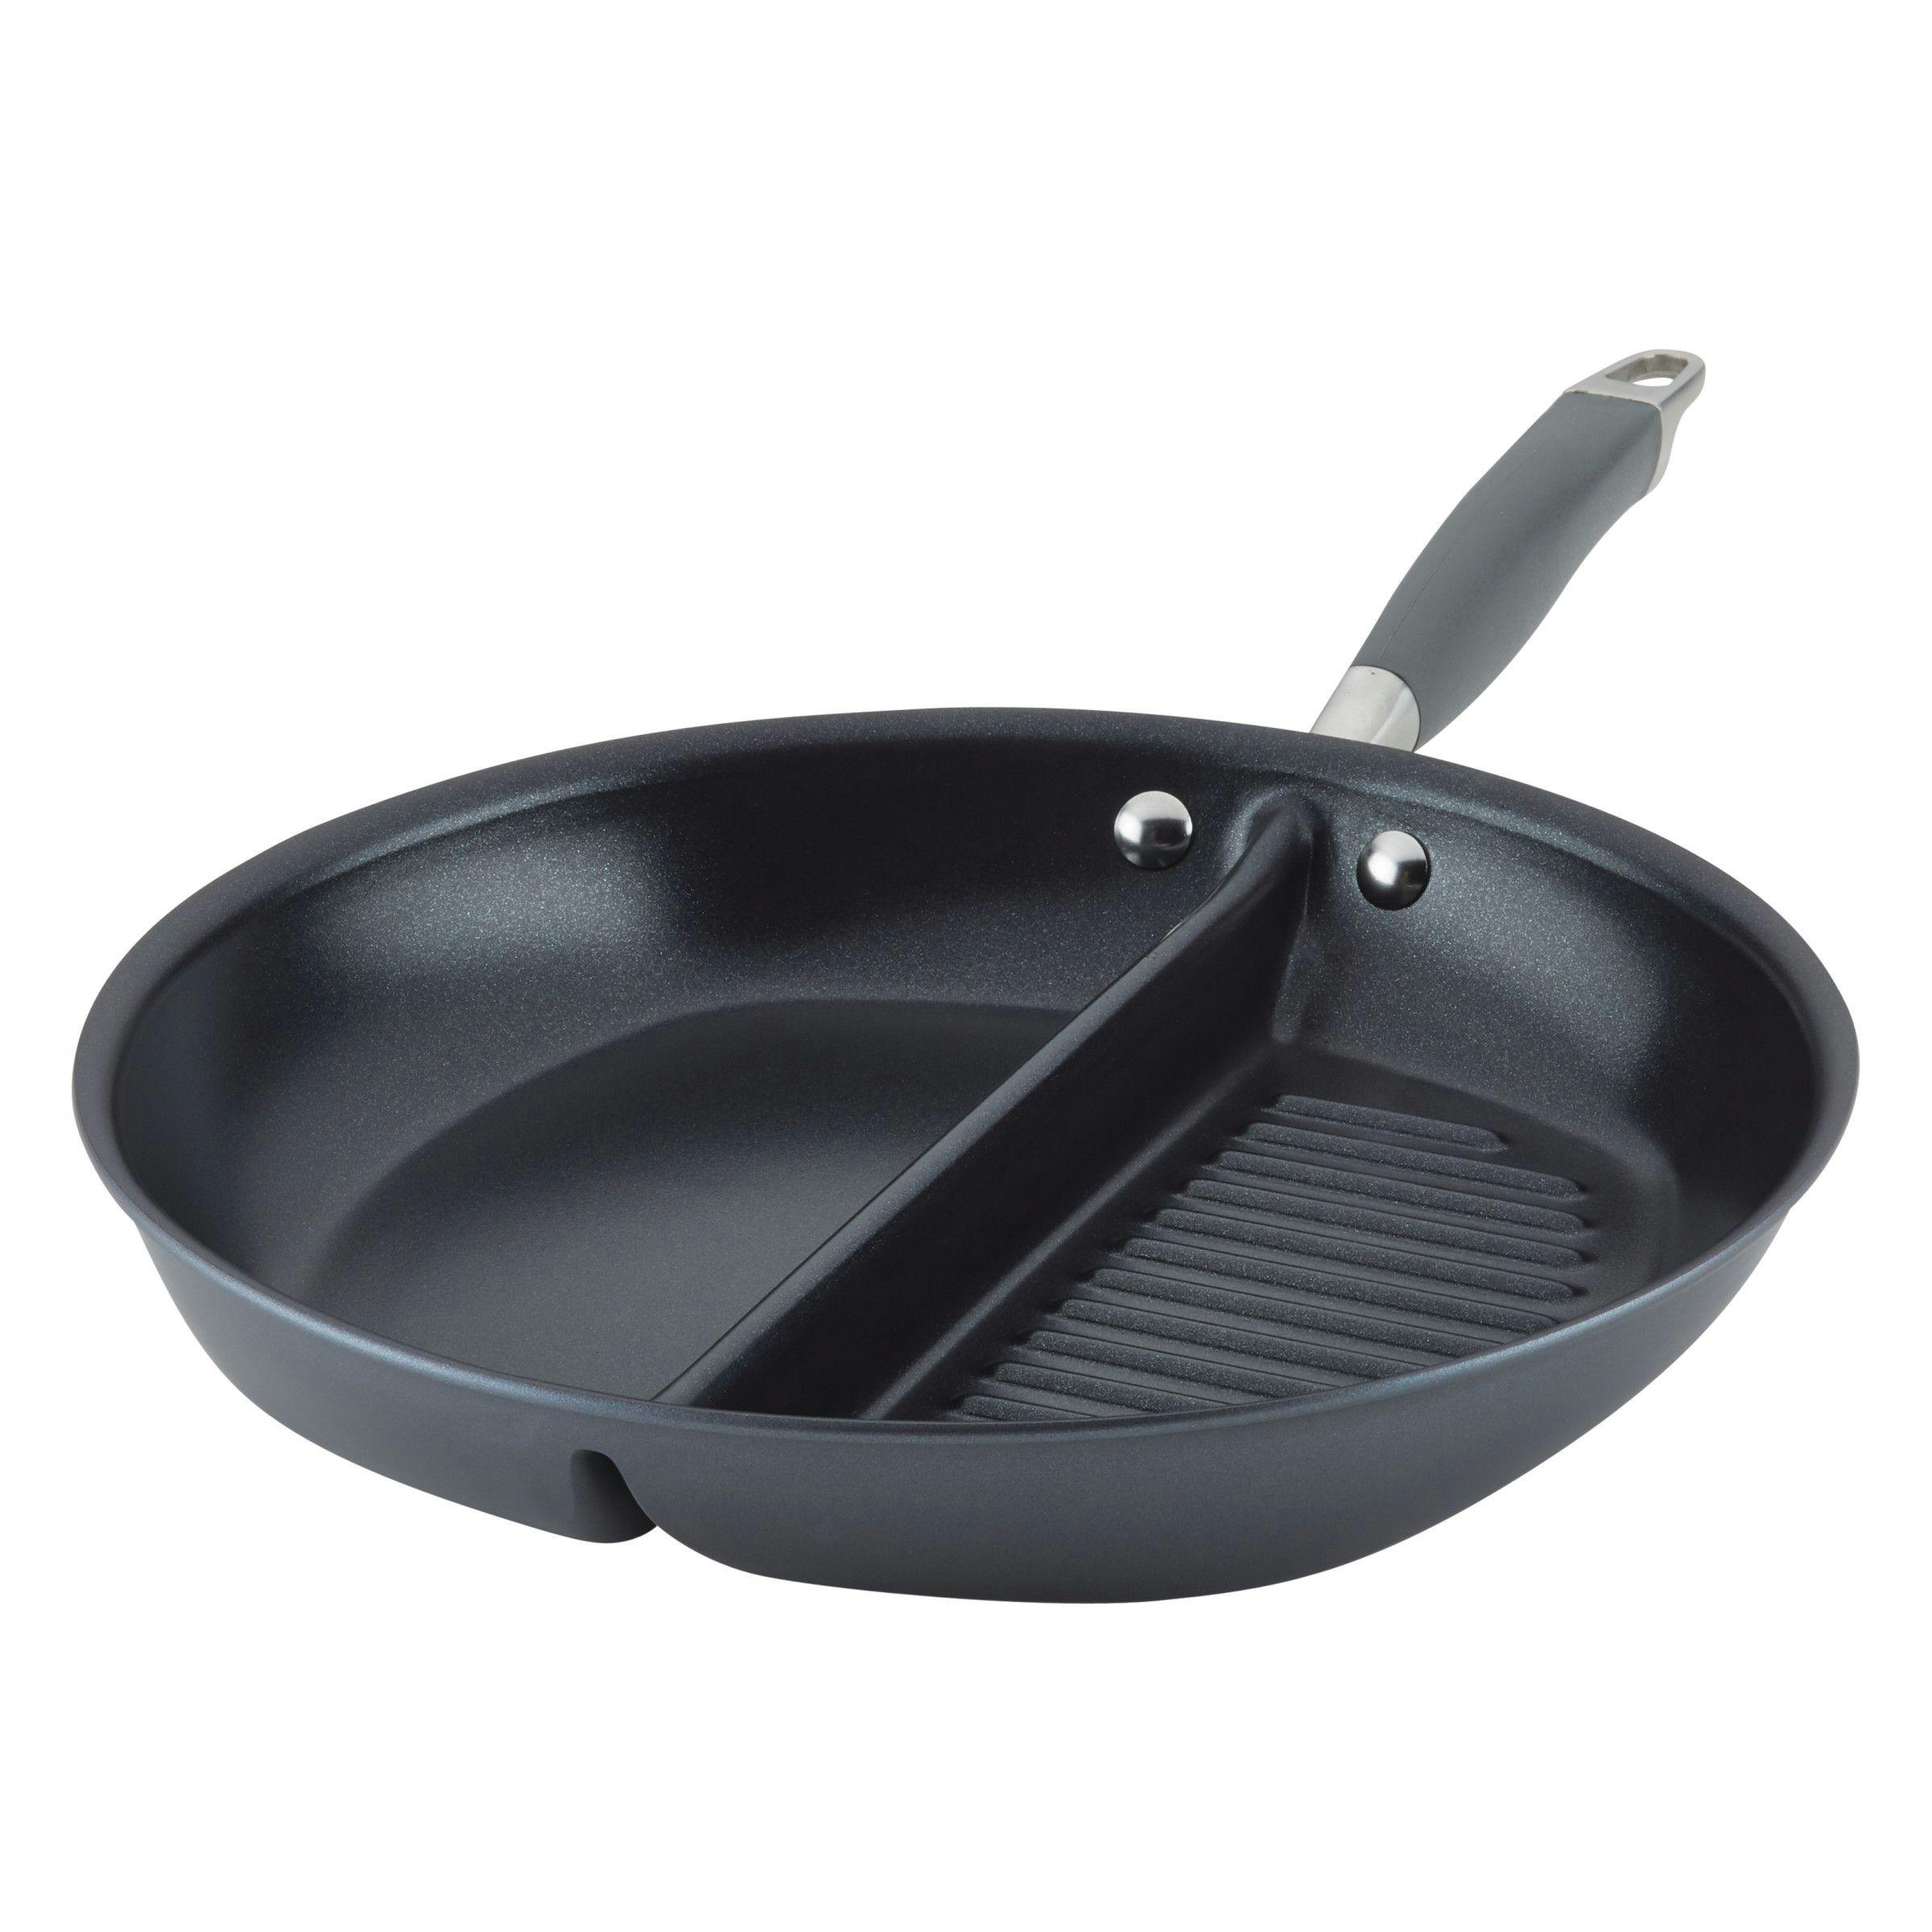 Anolon Advanced Home Hard-Anodized Nonstick Divided Grill and Griddle Pan, 12.5-Inch